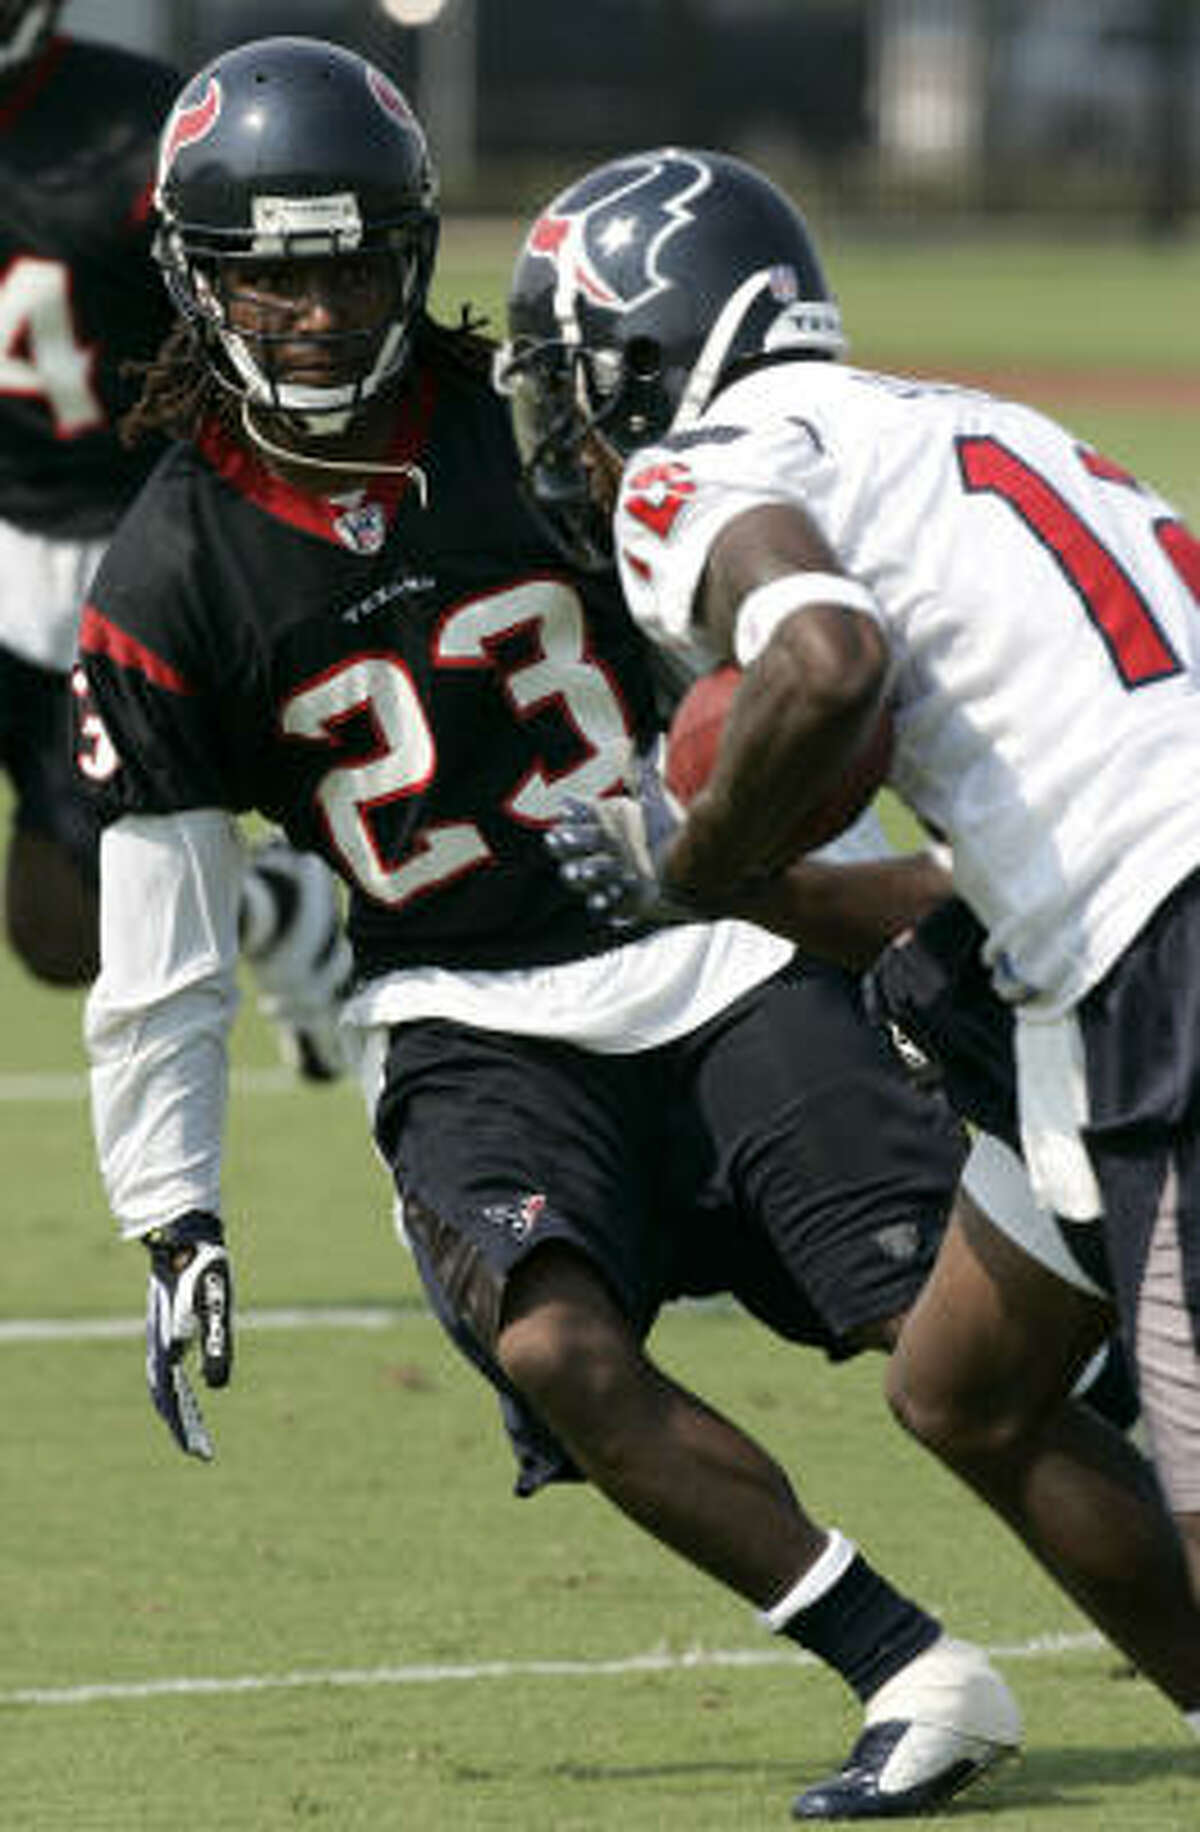 TEXANS: Cornerback Dunta Robinson (23) moves in to make a play on wide receiver Jacoby Jones (12).